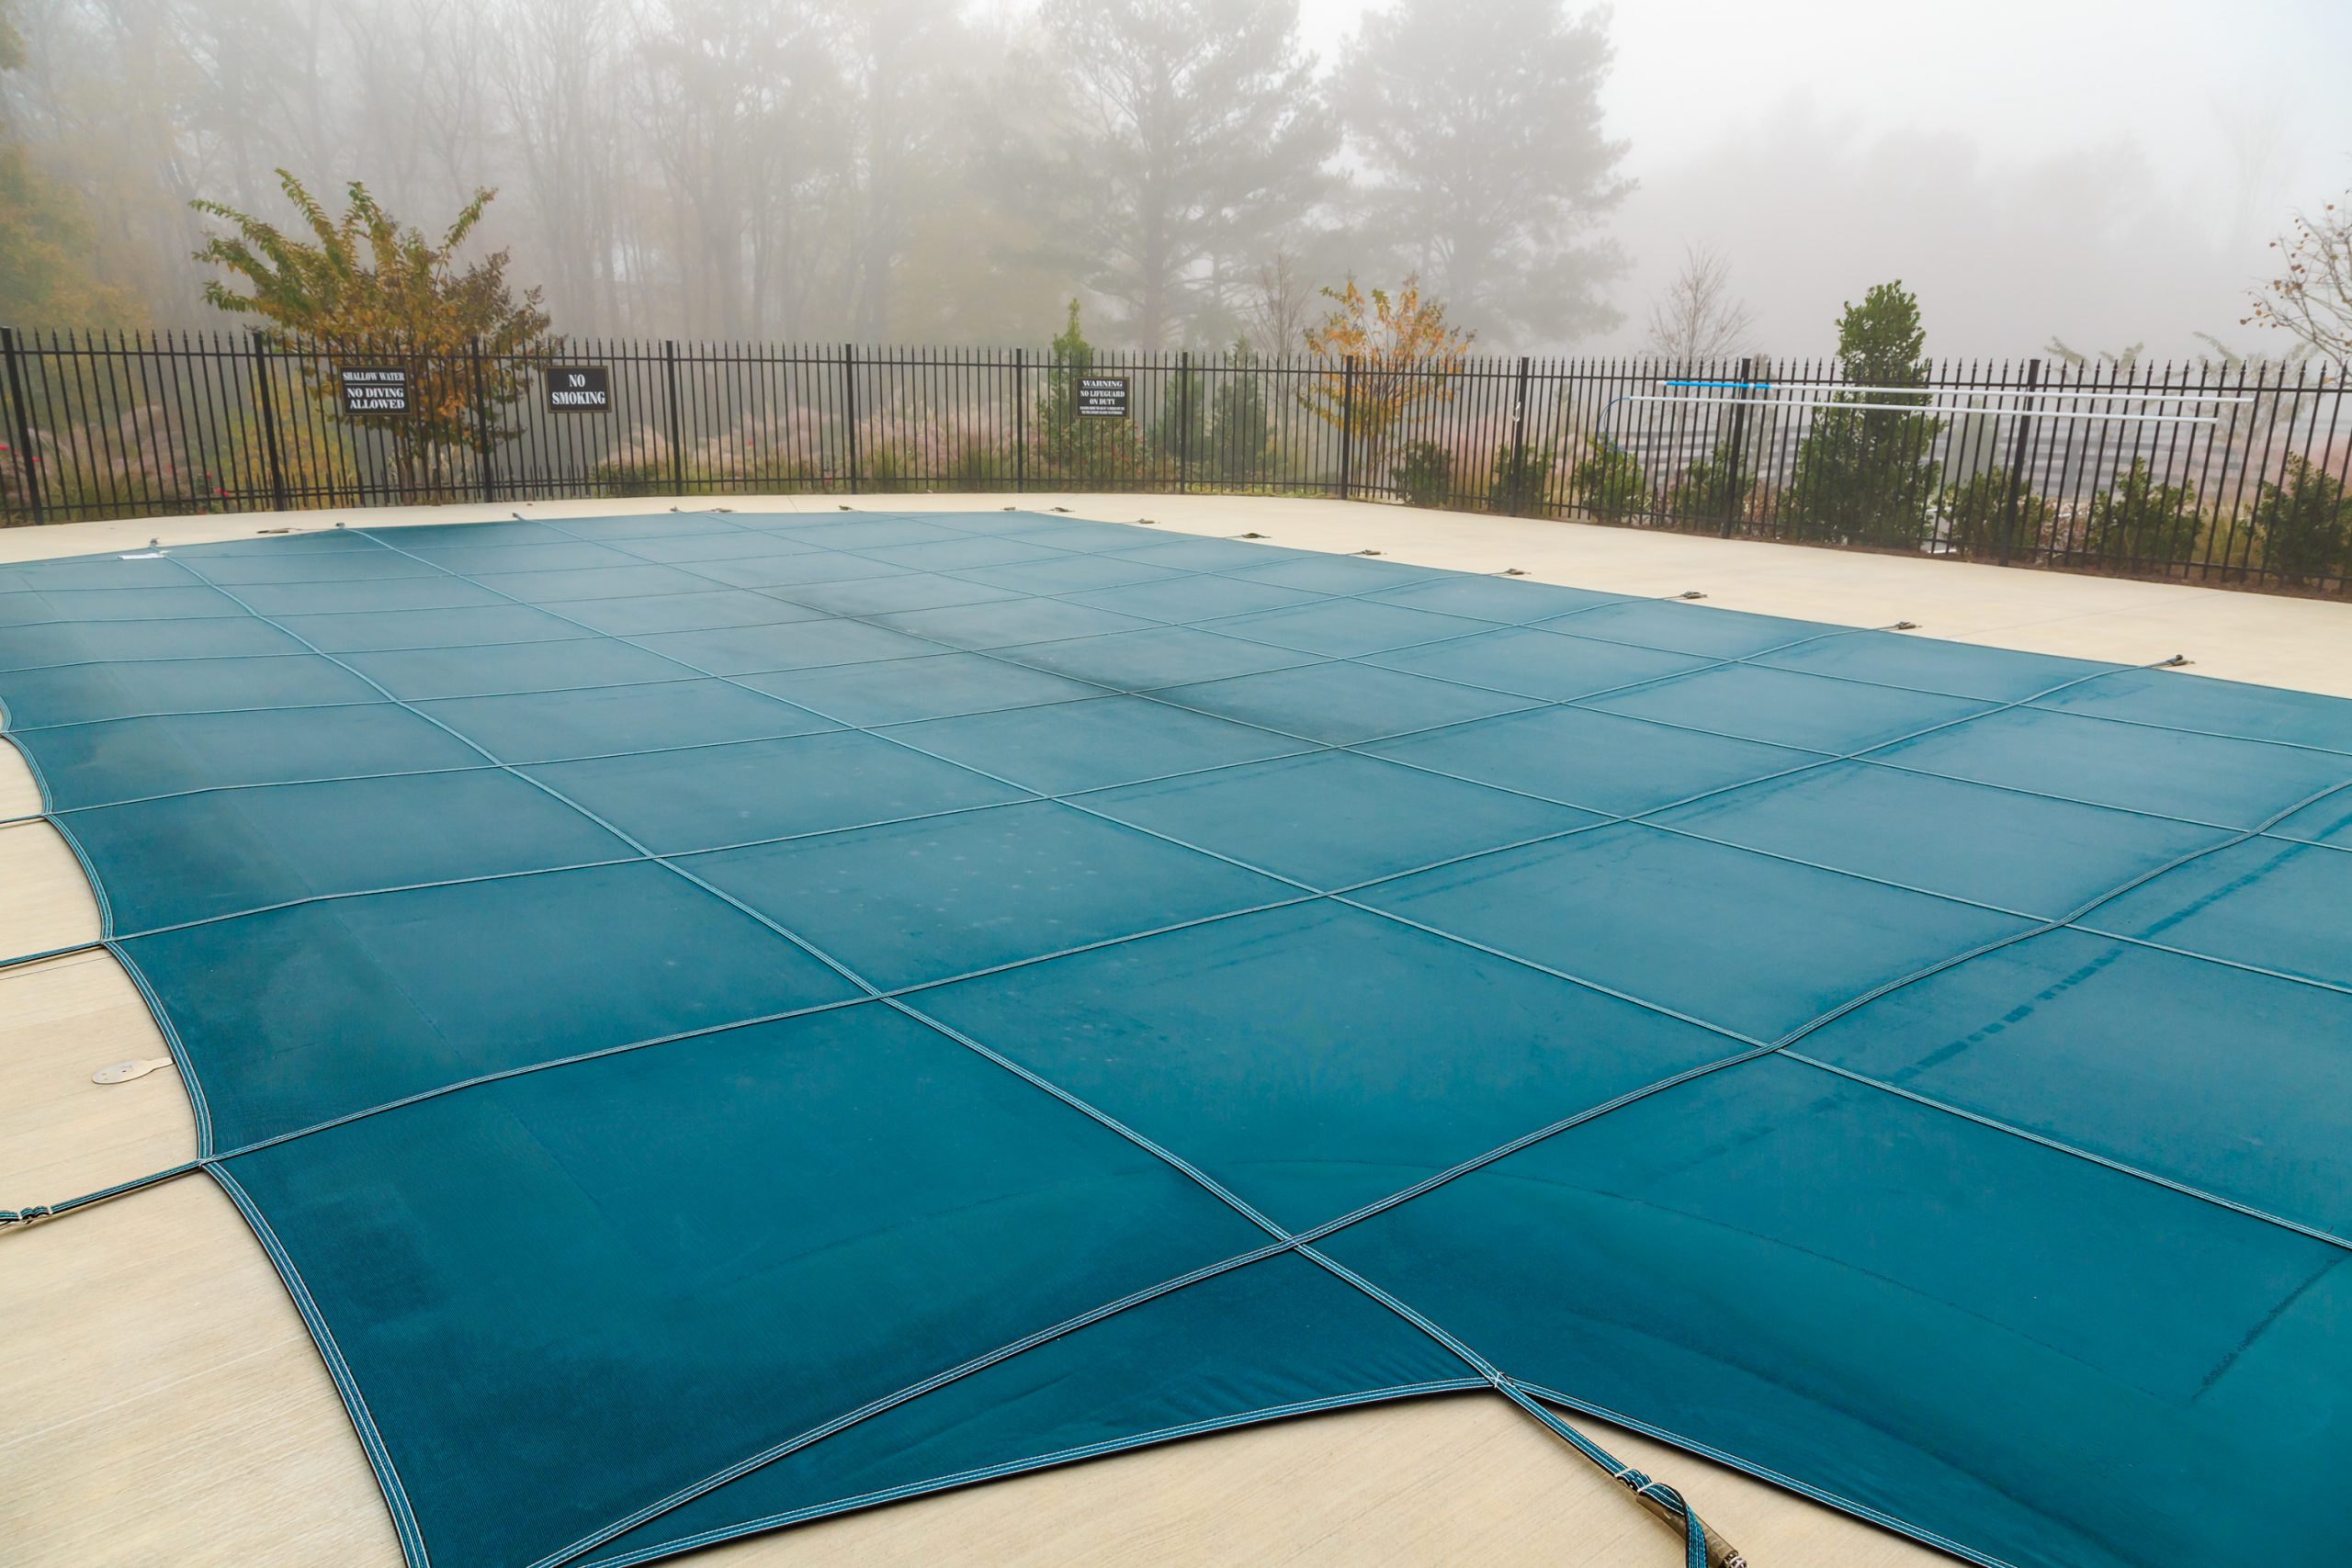 Prevent Drowning with Mesh Pool Covers